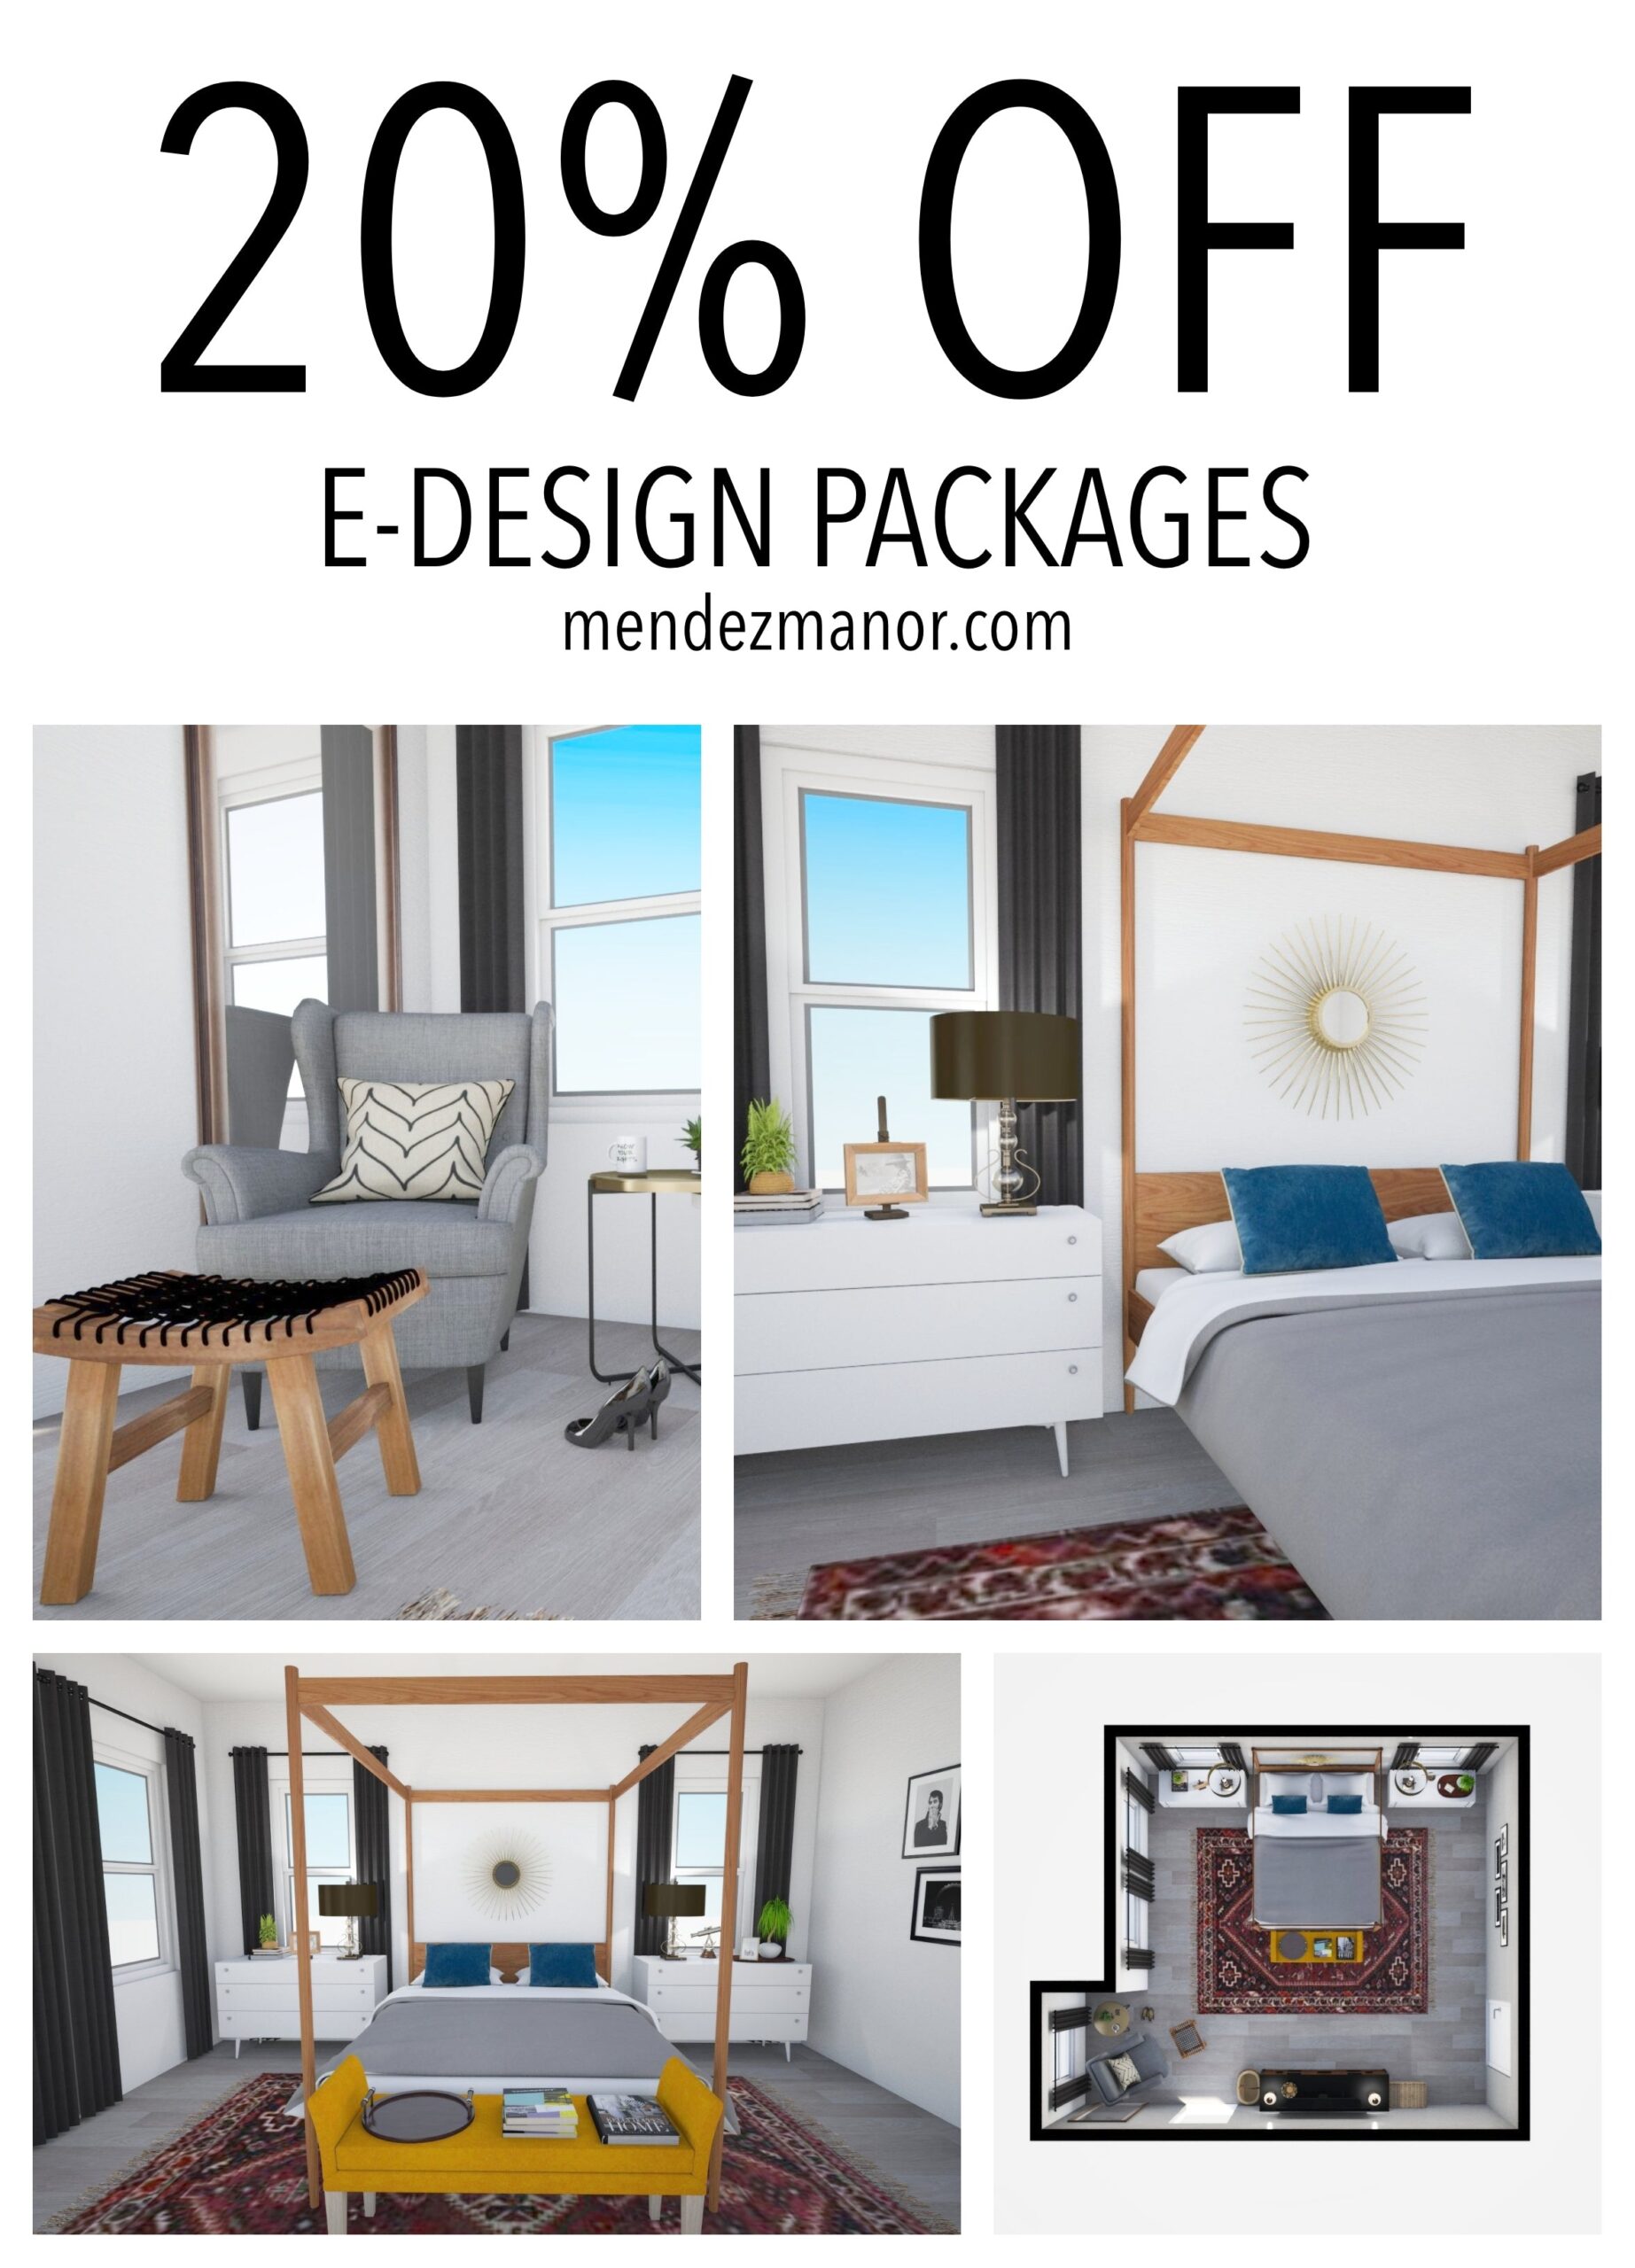 E-Design Packages Now Available!